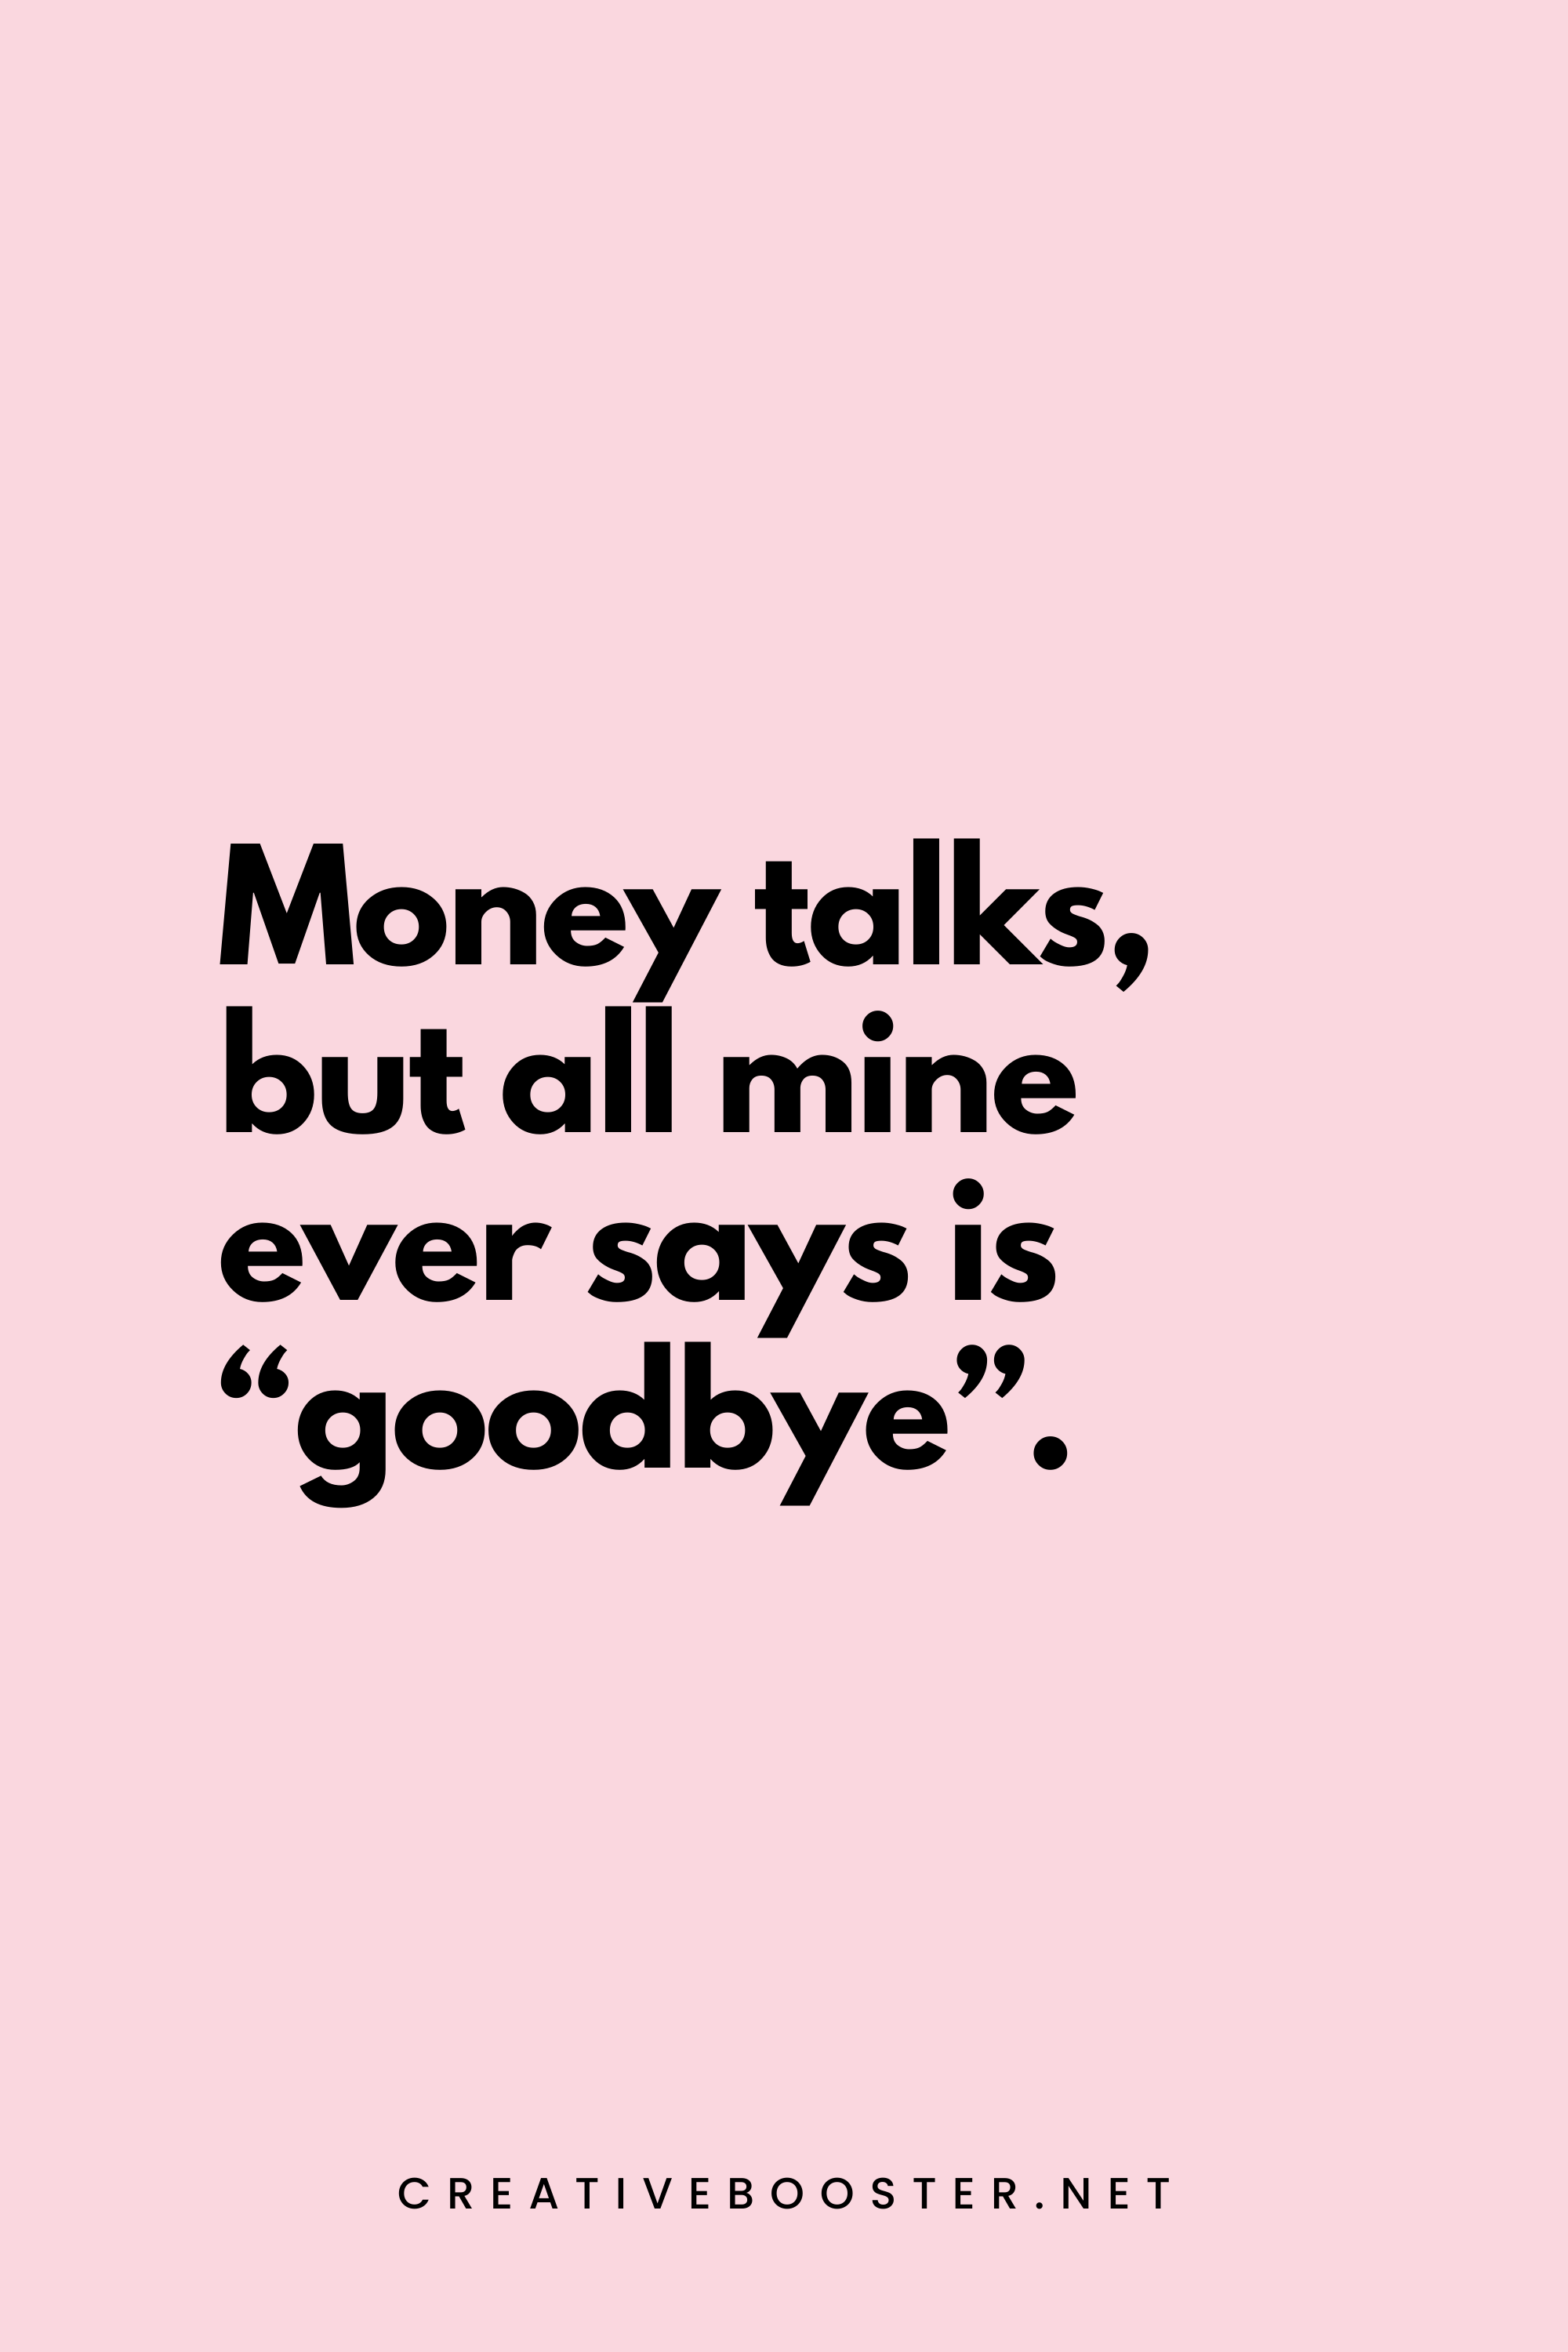 60. Money talks, but all mine ever says is 'goodbye'. - Creativebooster.net - 6. Funny Financial Freedom Quotes